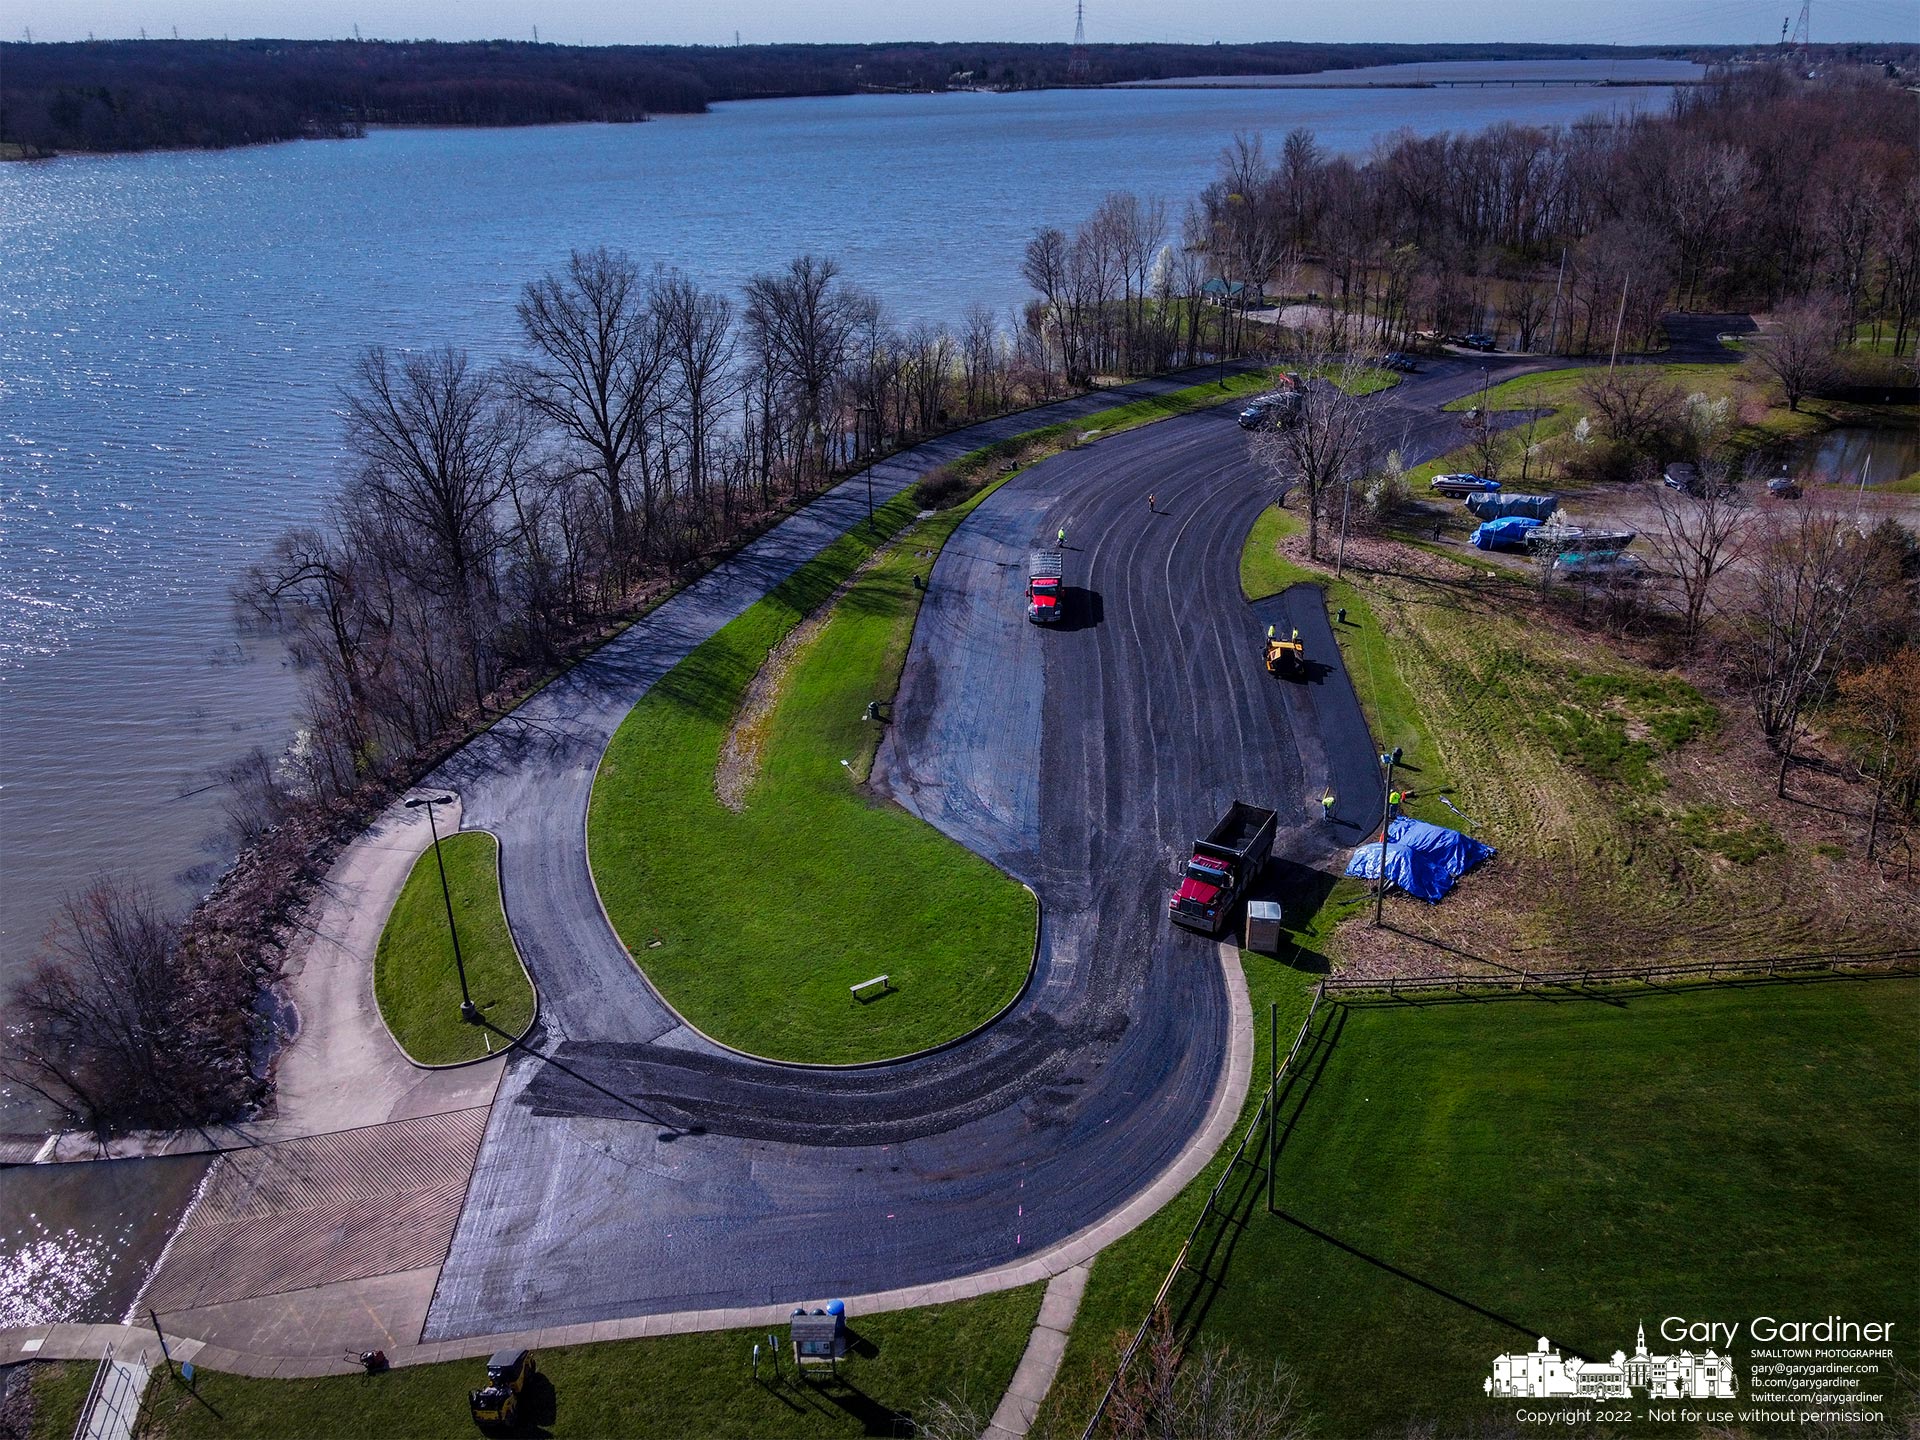 A contractor begins laying a new layer of asphalt across the parking lot at Red Bank marina on Hoover Reservoir after removing the old surface and repairing the gravel underlayer. My Final Photo for April 15, 2022.